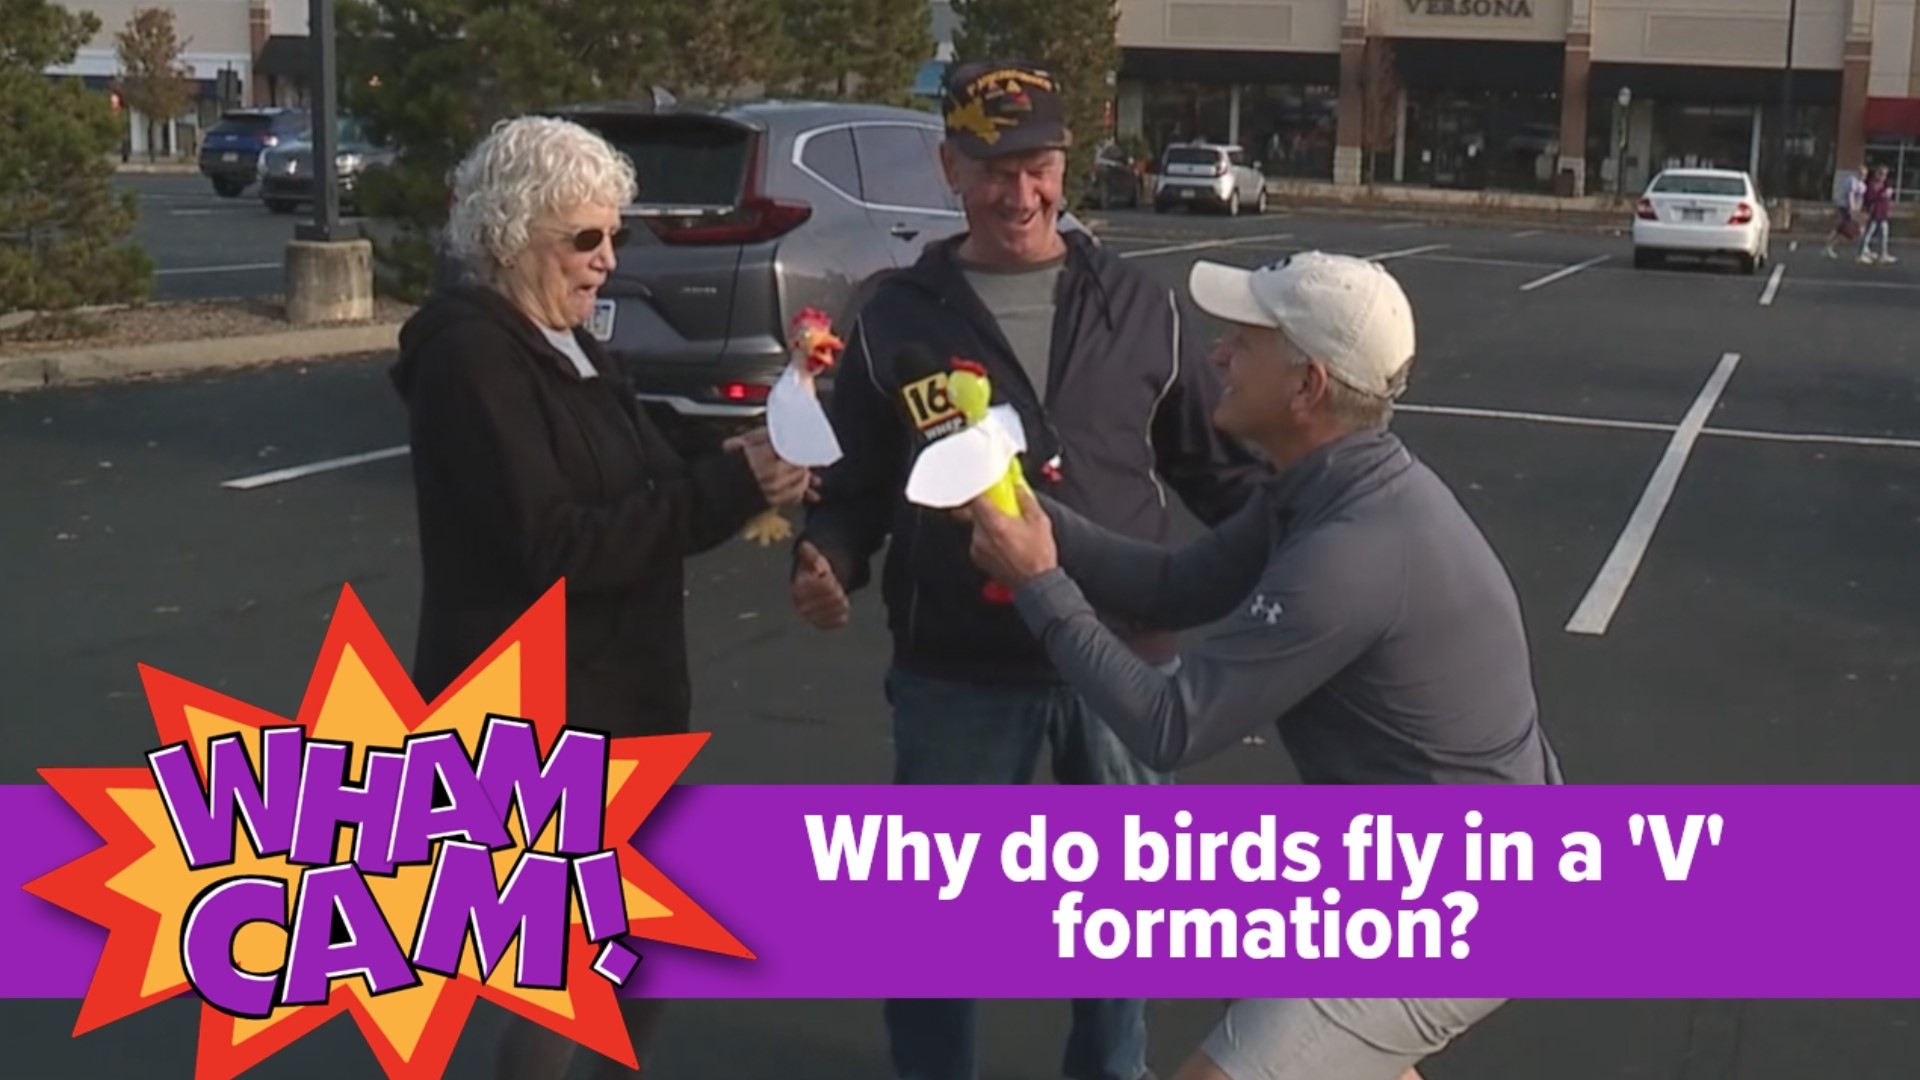 Birds have begun migrating south, but ever wonder why they fly in a "V" formation? Joe was in Moosic to see if anyone there had the answer.